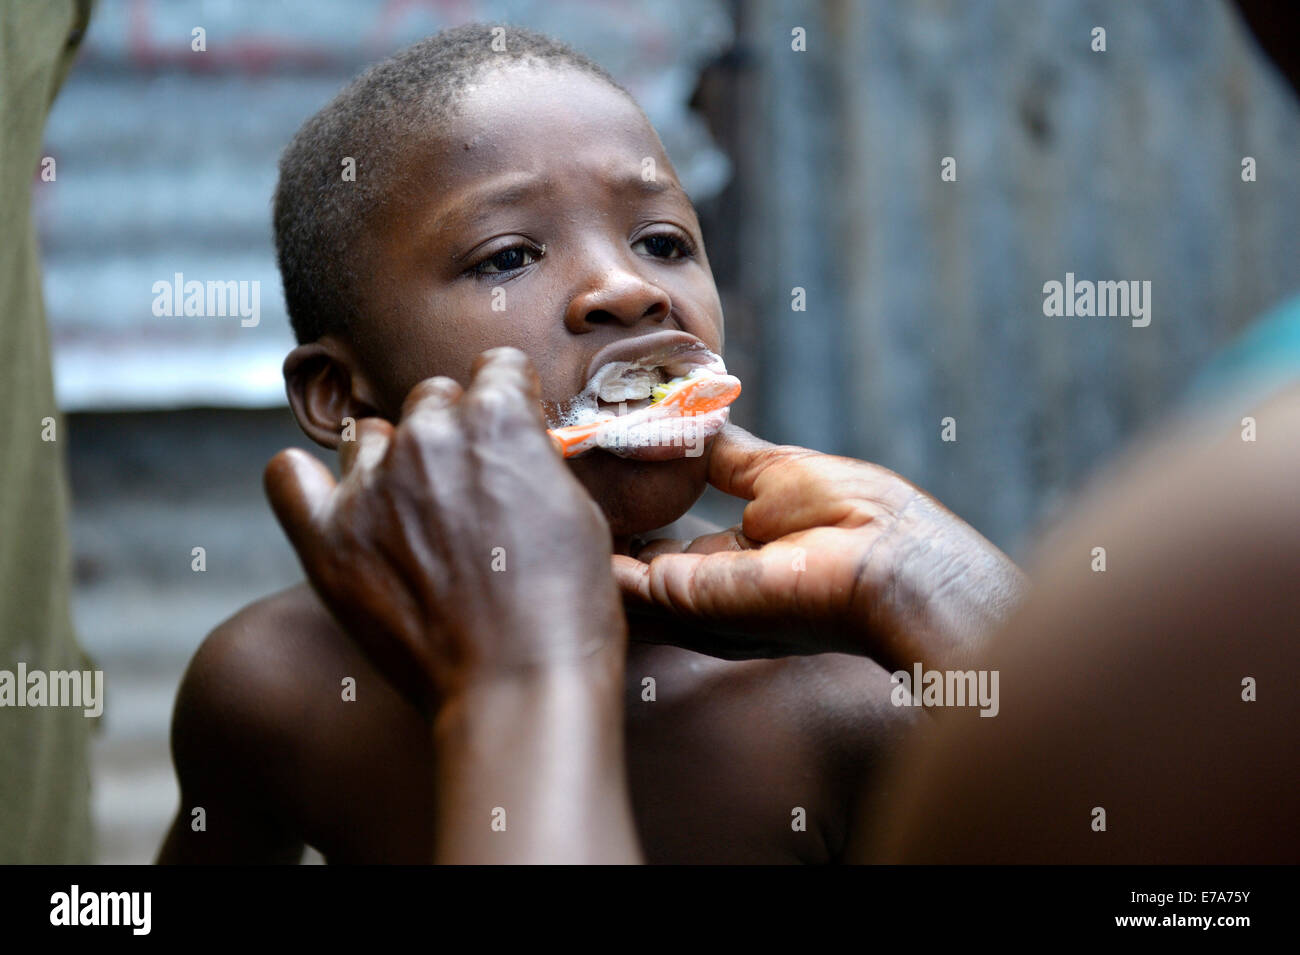 Boy, 7 years, having his teeth brushed, Camp Icare, camp for earthquake refugees, Fort National, Port-au-Prince, Haiti Stock Photo